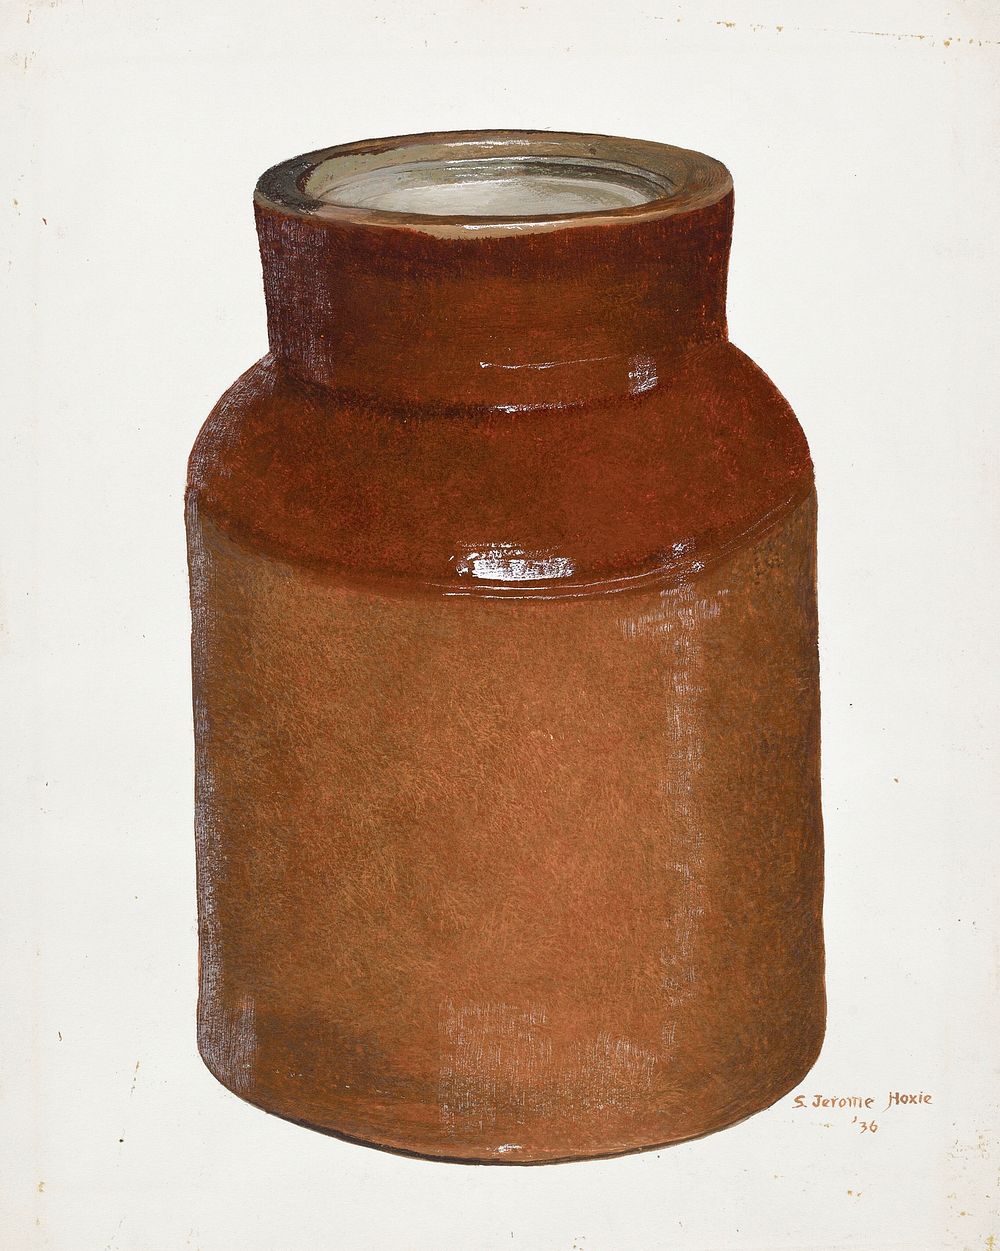 Churn (1936) by Jerome Hoxie. Original from The National Gallery of Art. Digitally enhanced by rawpixel.